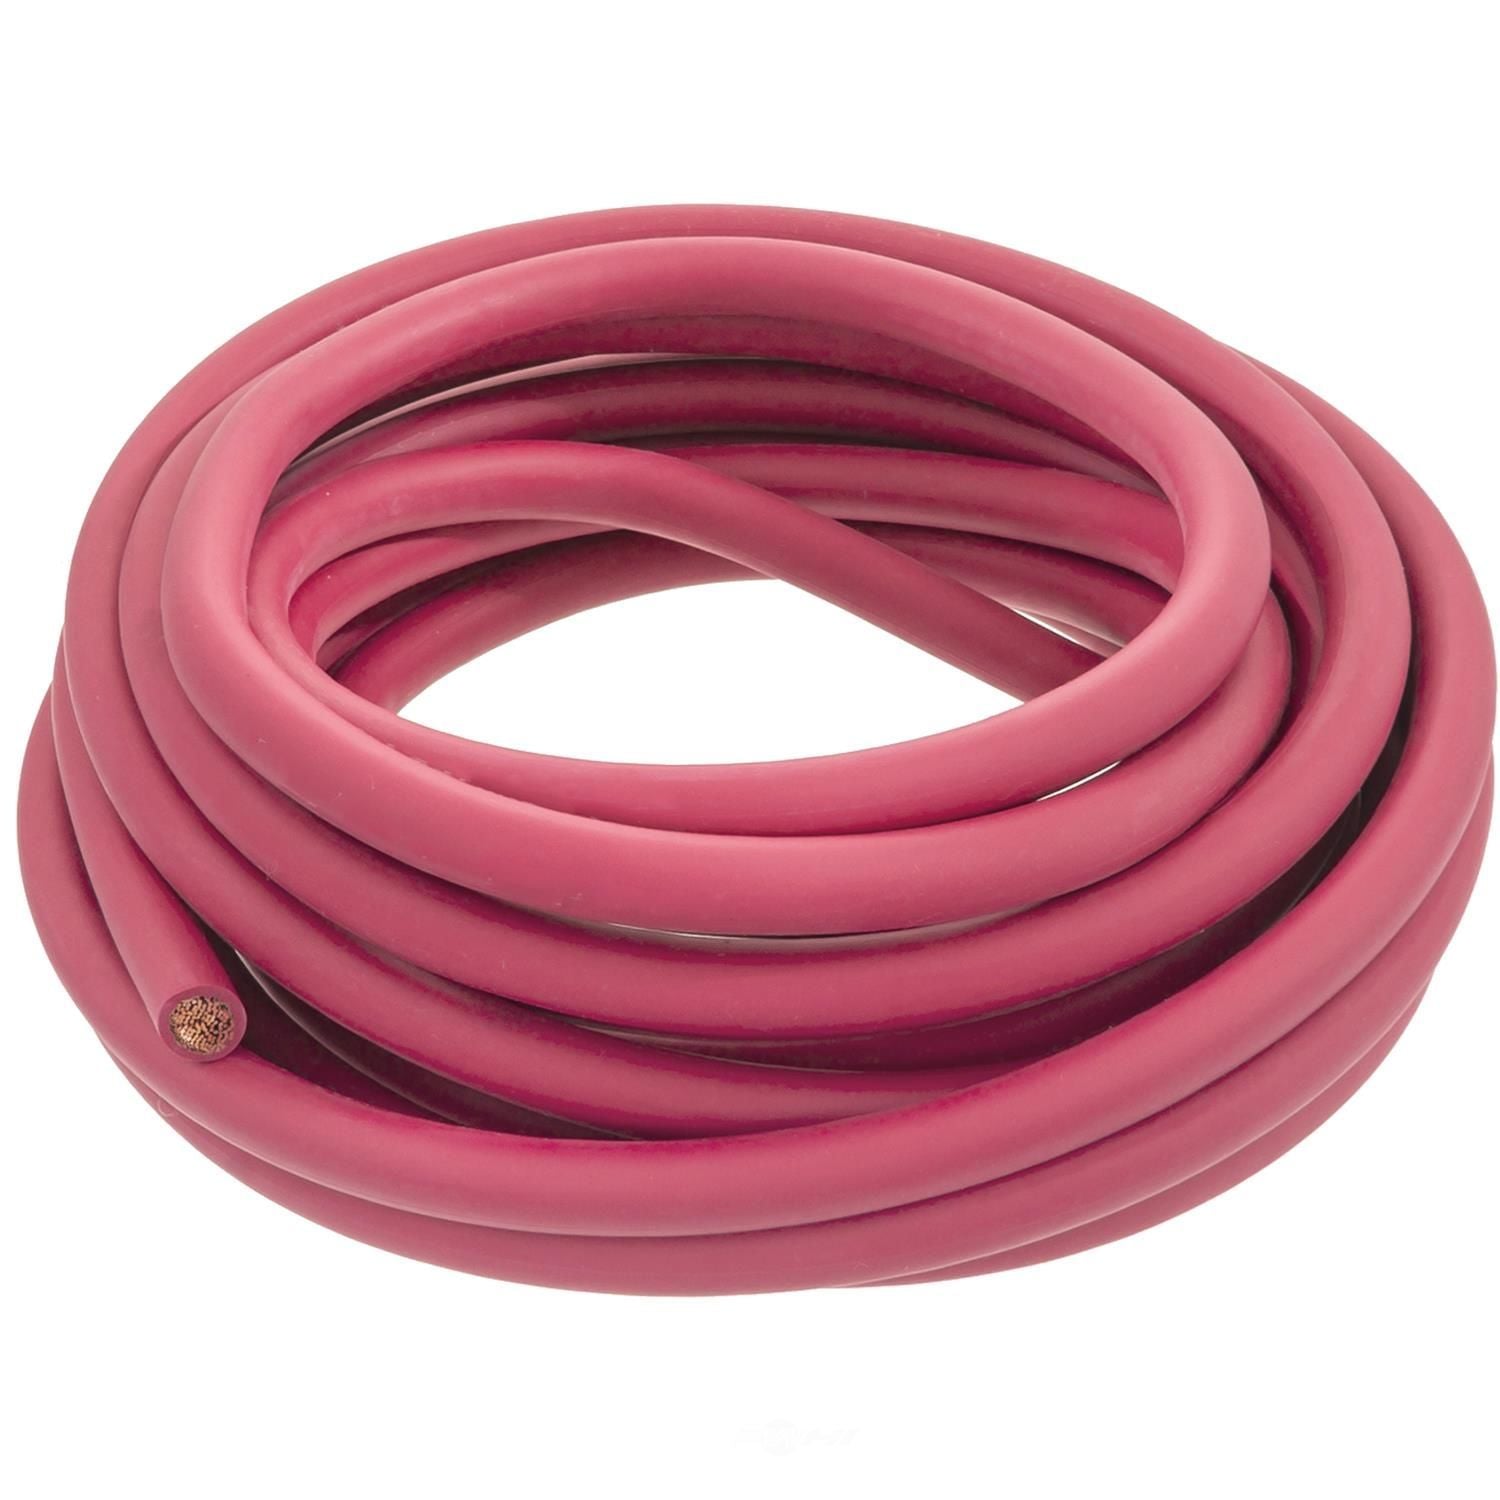 YSP CB17RD-25 Wells Bulk Cable (Red, 25', 2/0G)